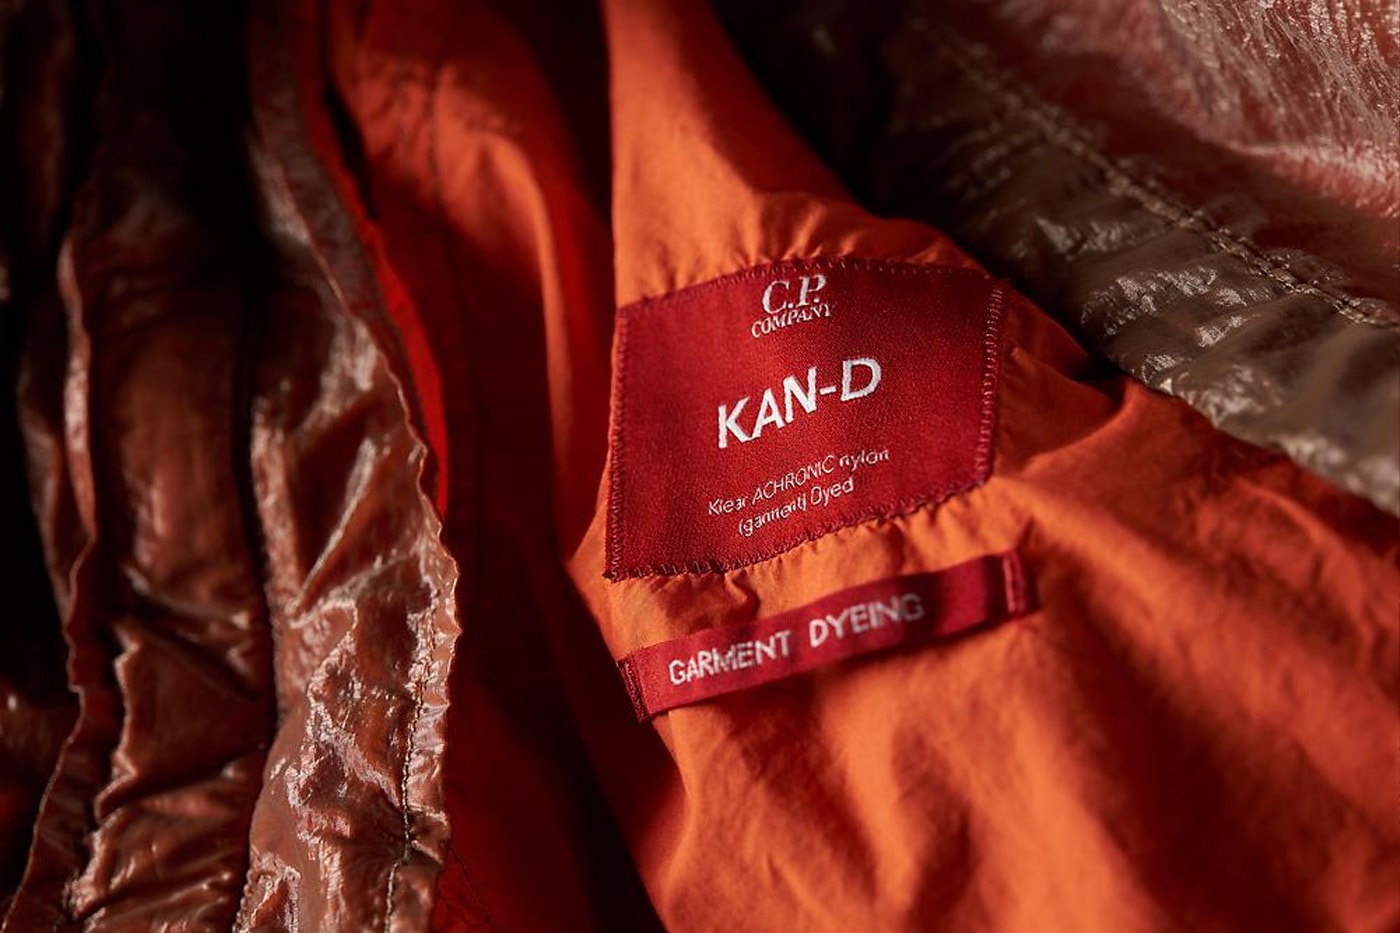 CP Company Kan-D K clear a chronic nylon dyed yarn turqoise bright orange military greeen detachable hood release info date price